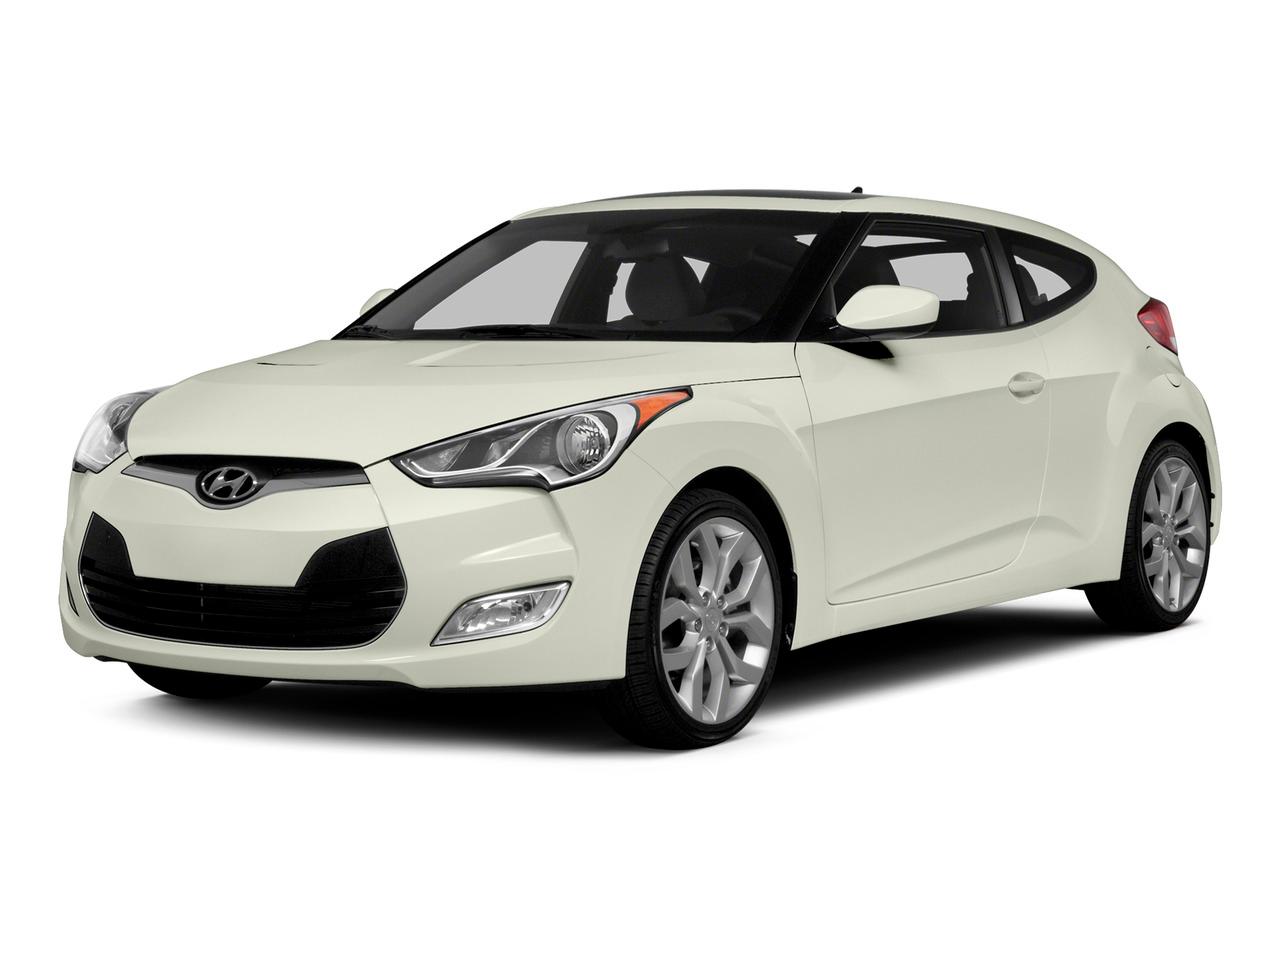 2015 Hyundai Veloster Vehicle Photo in Plainfield, IL 60586